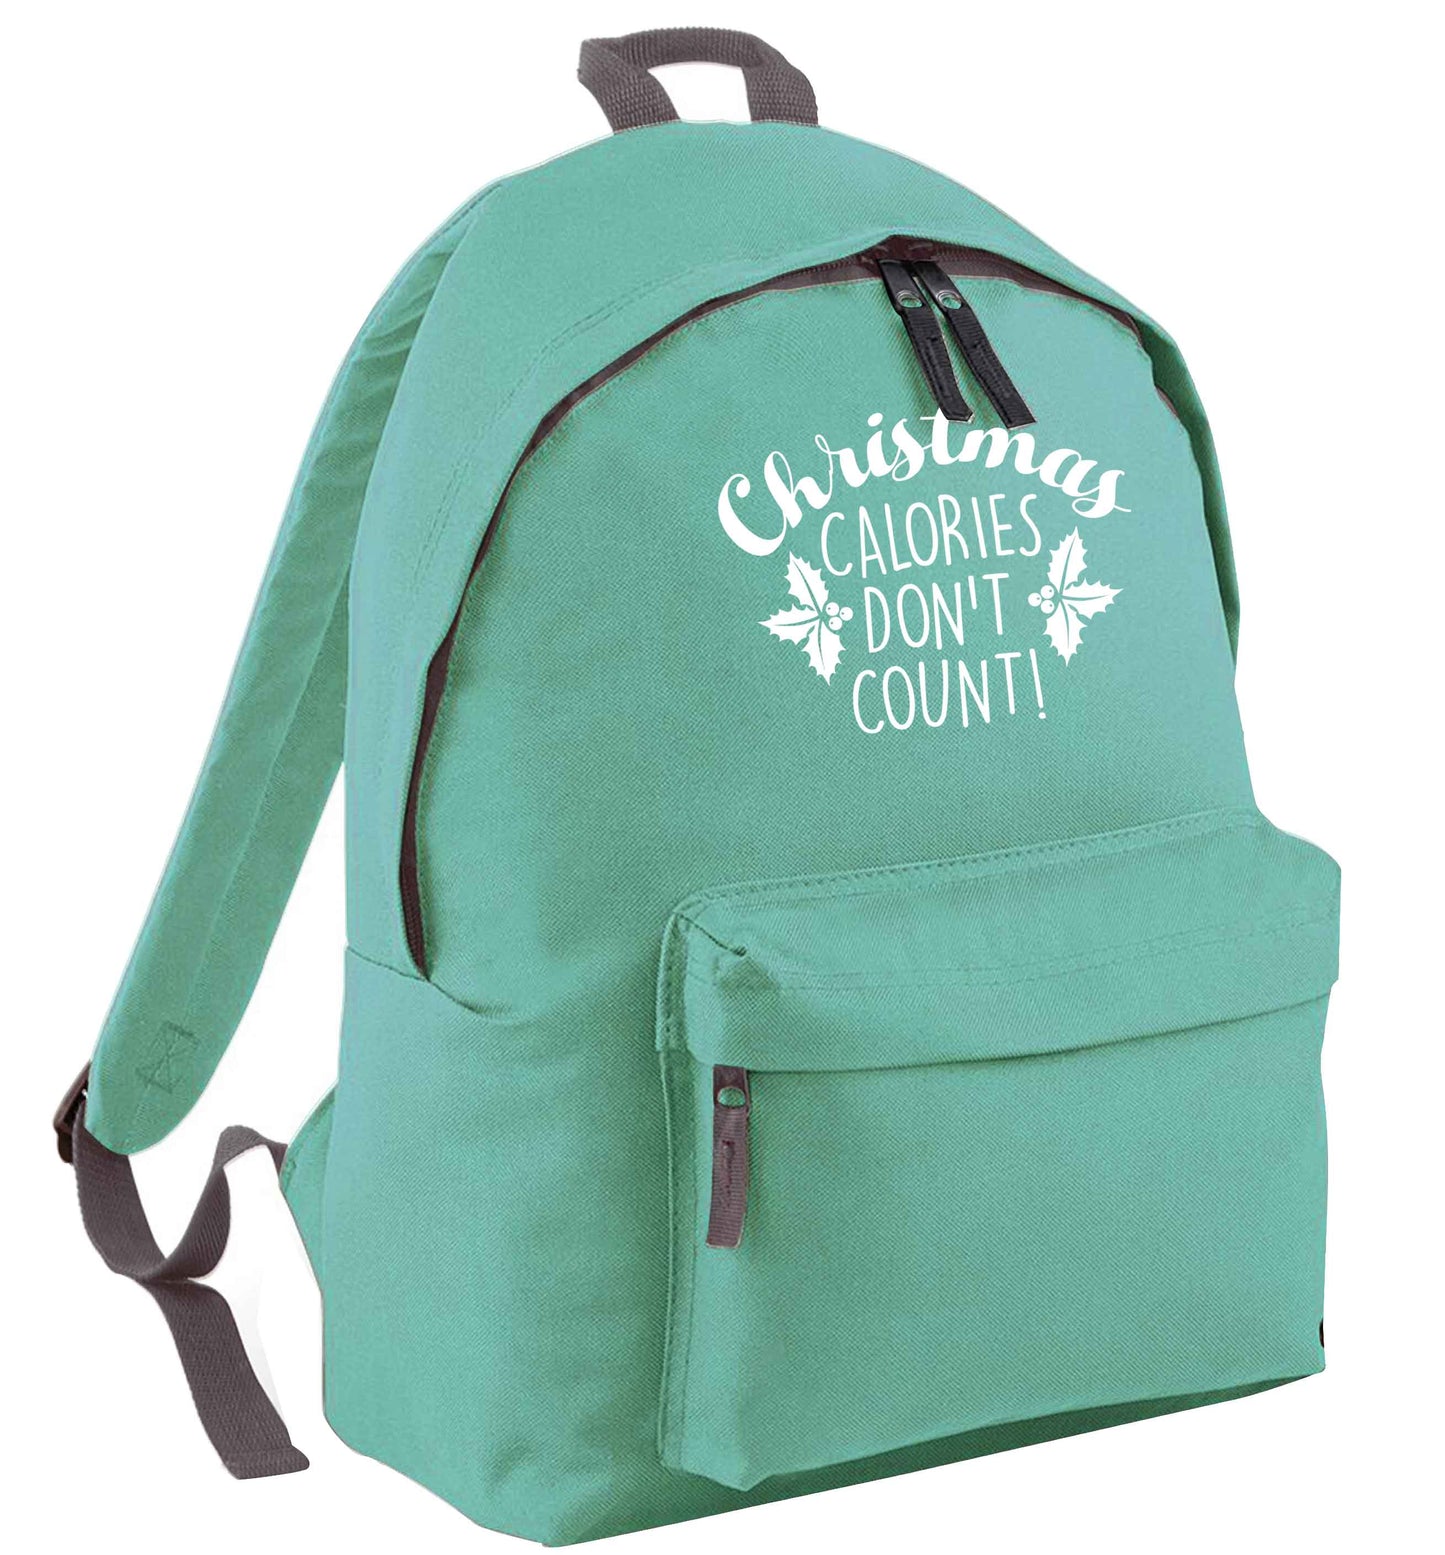 Christmas calories don't count mint adults backpack